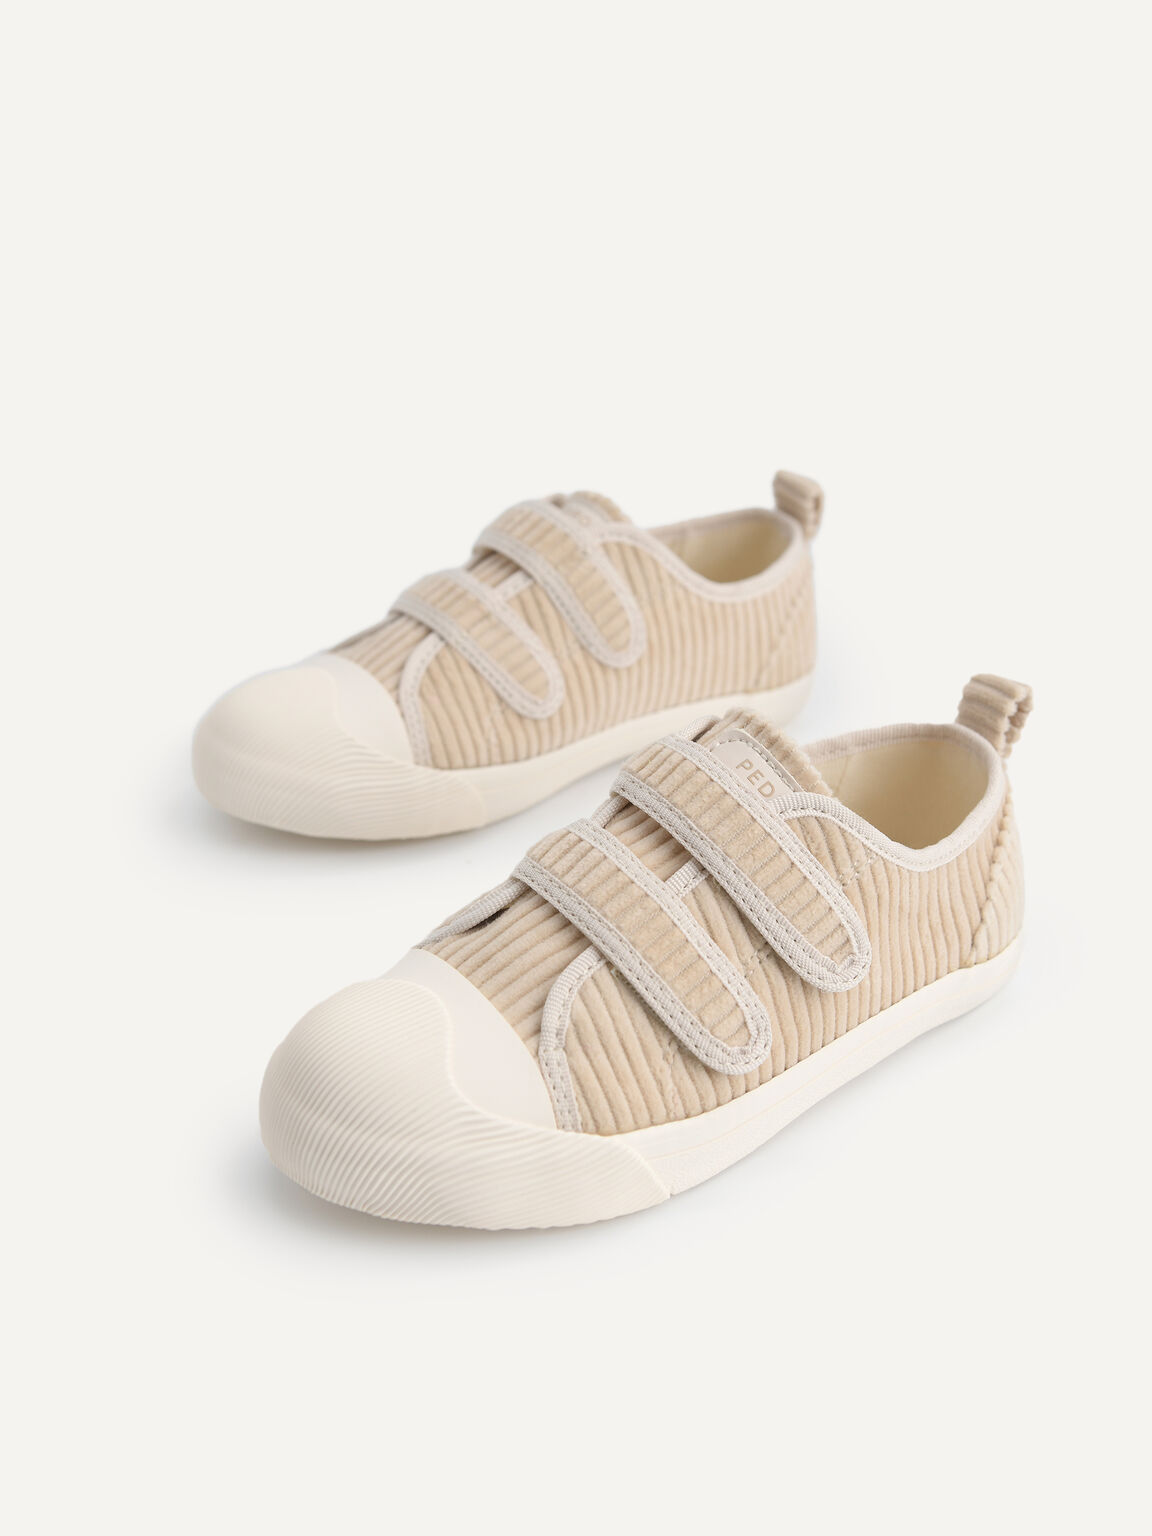 Corduroy Sneakers, Taupe